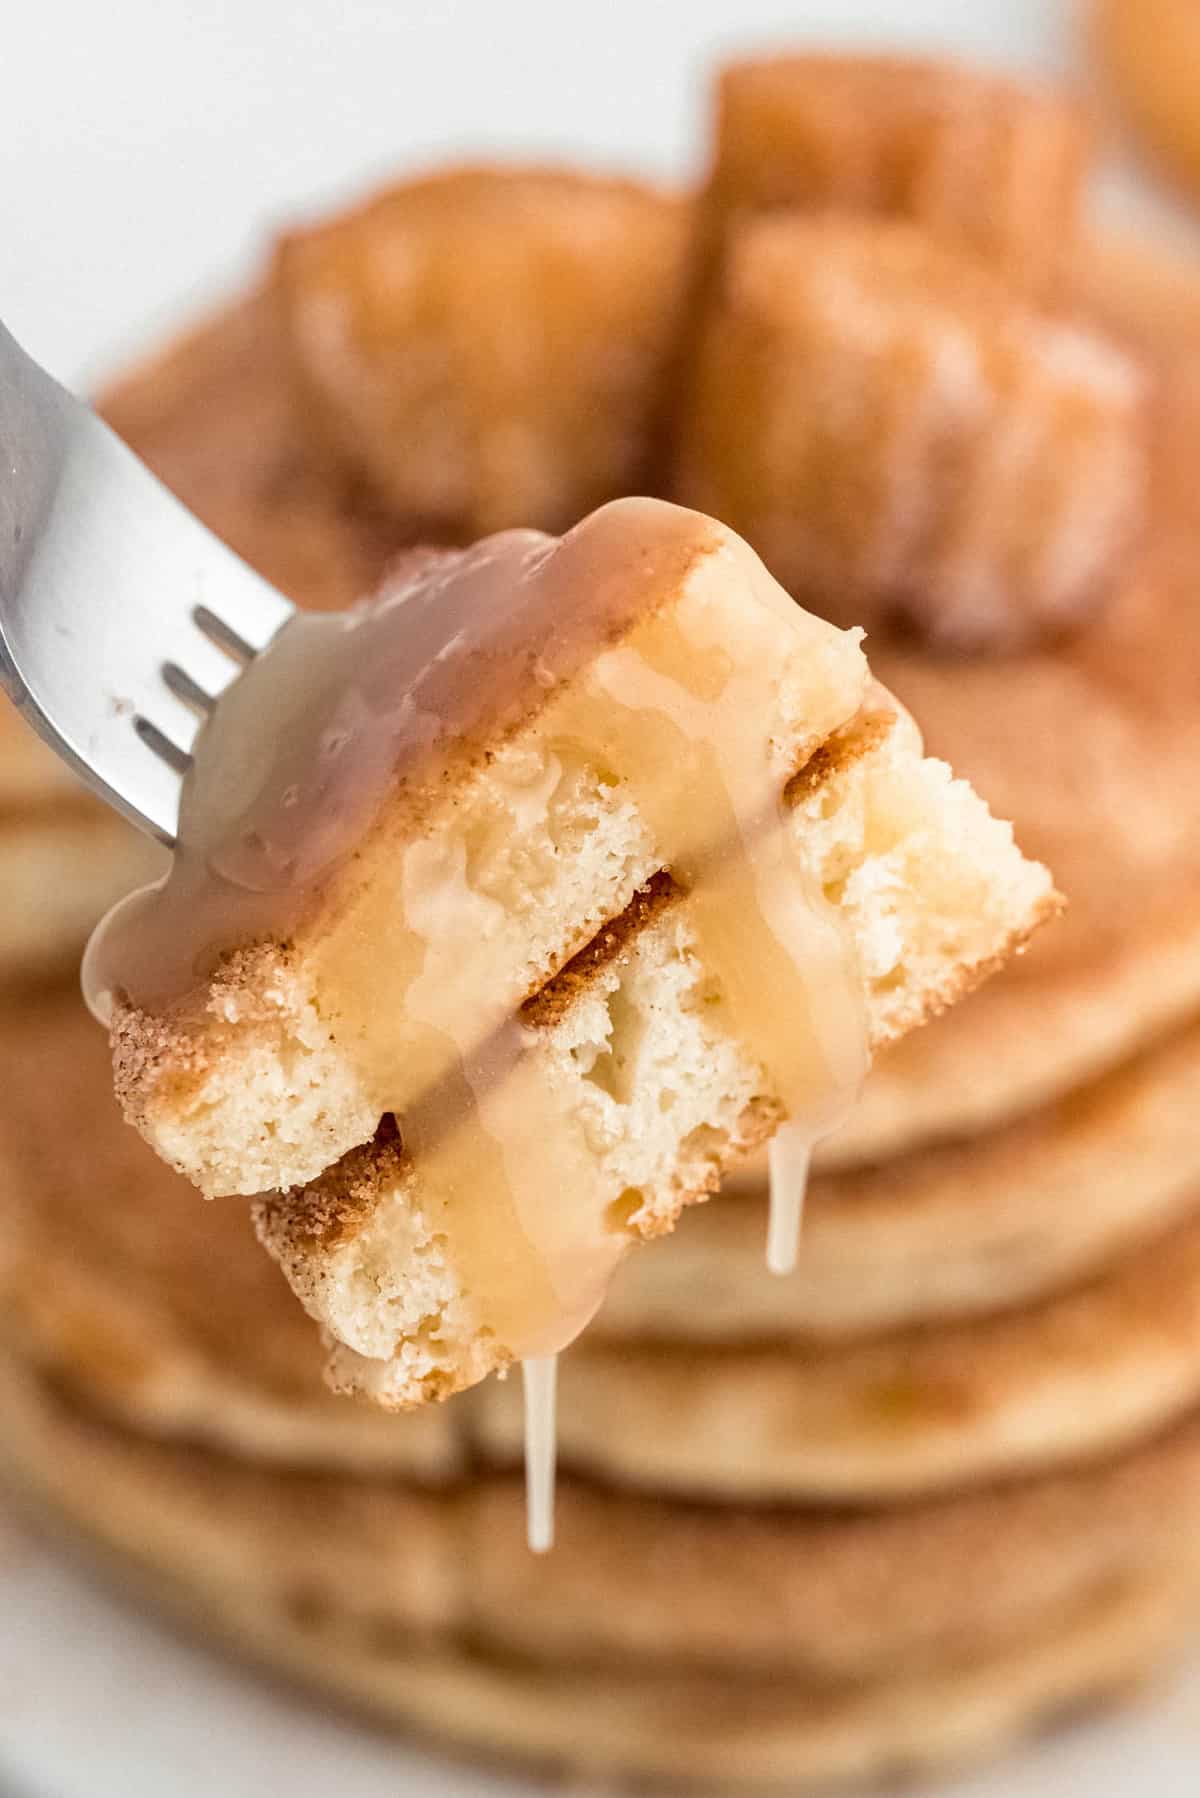 Pancakes with cinnamon sugar and syrup on a fork.